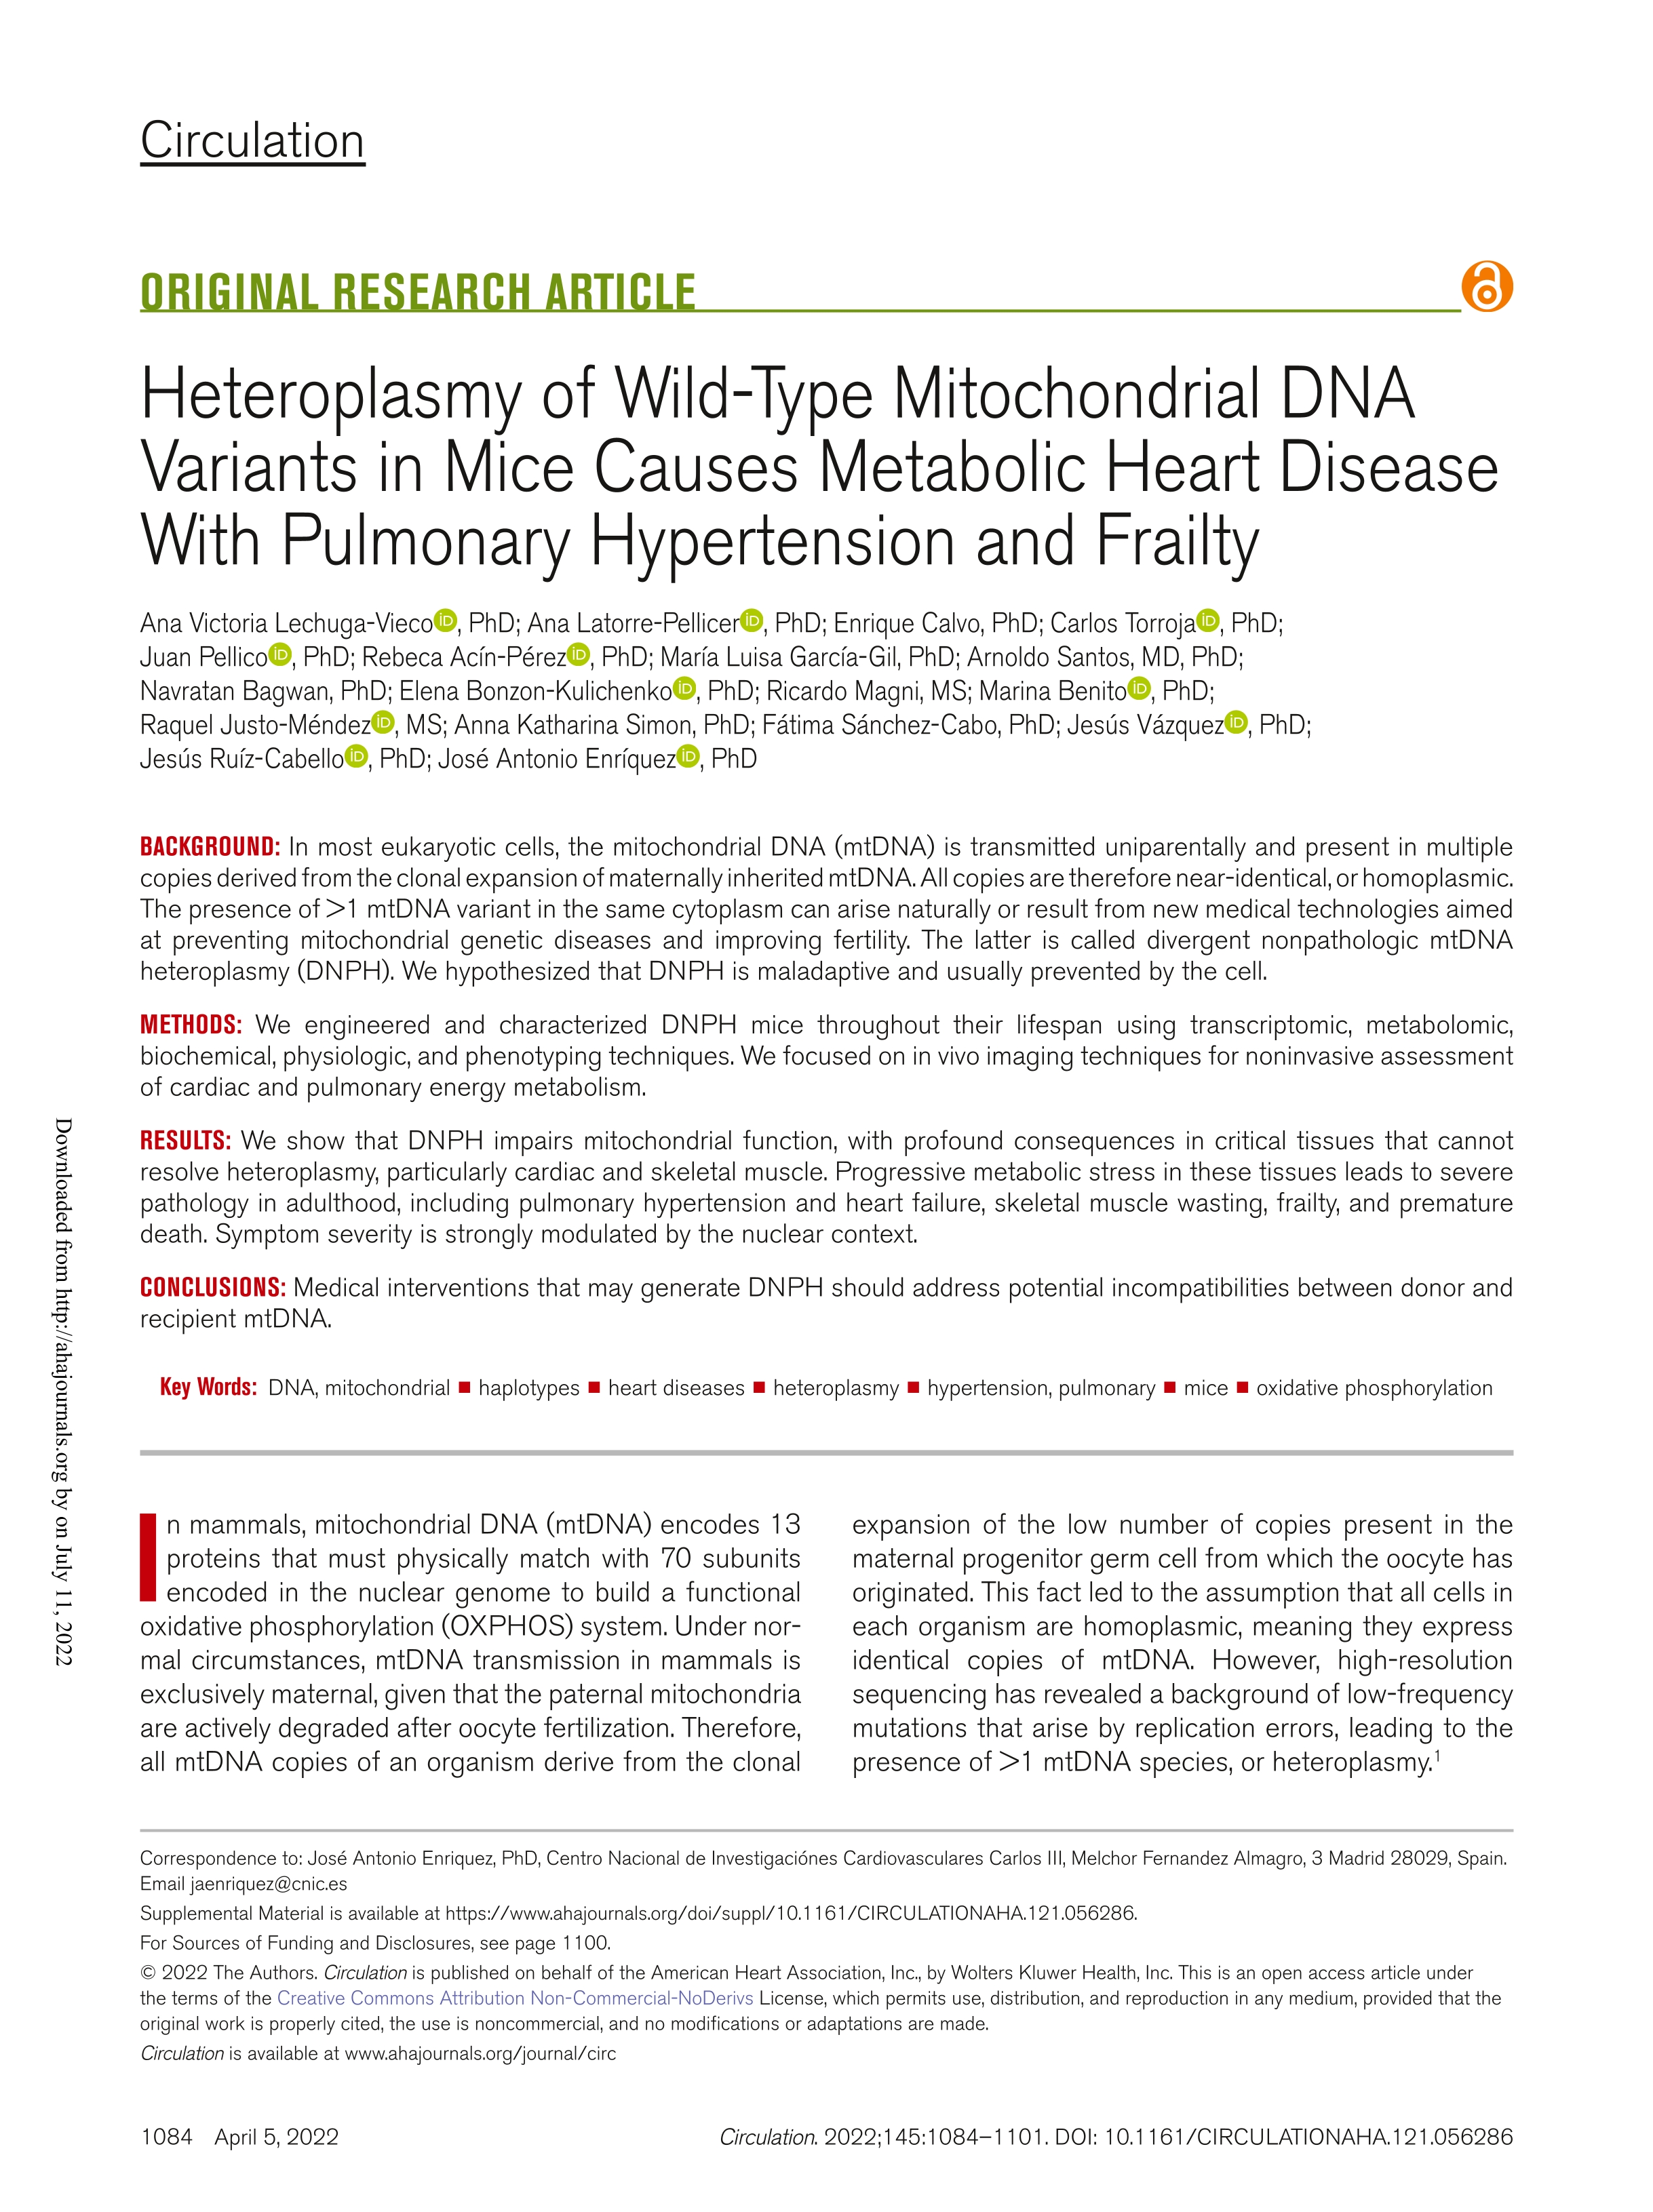 Heteroplasmy of Wild-Type Mitochondrial DNA Variants in Mice Causes Metabolic Heart Disease with Pulmonary Hypertension and Frailty; 35236094